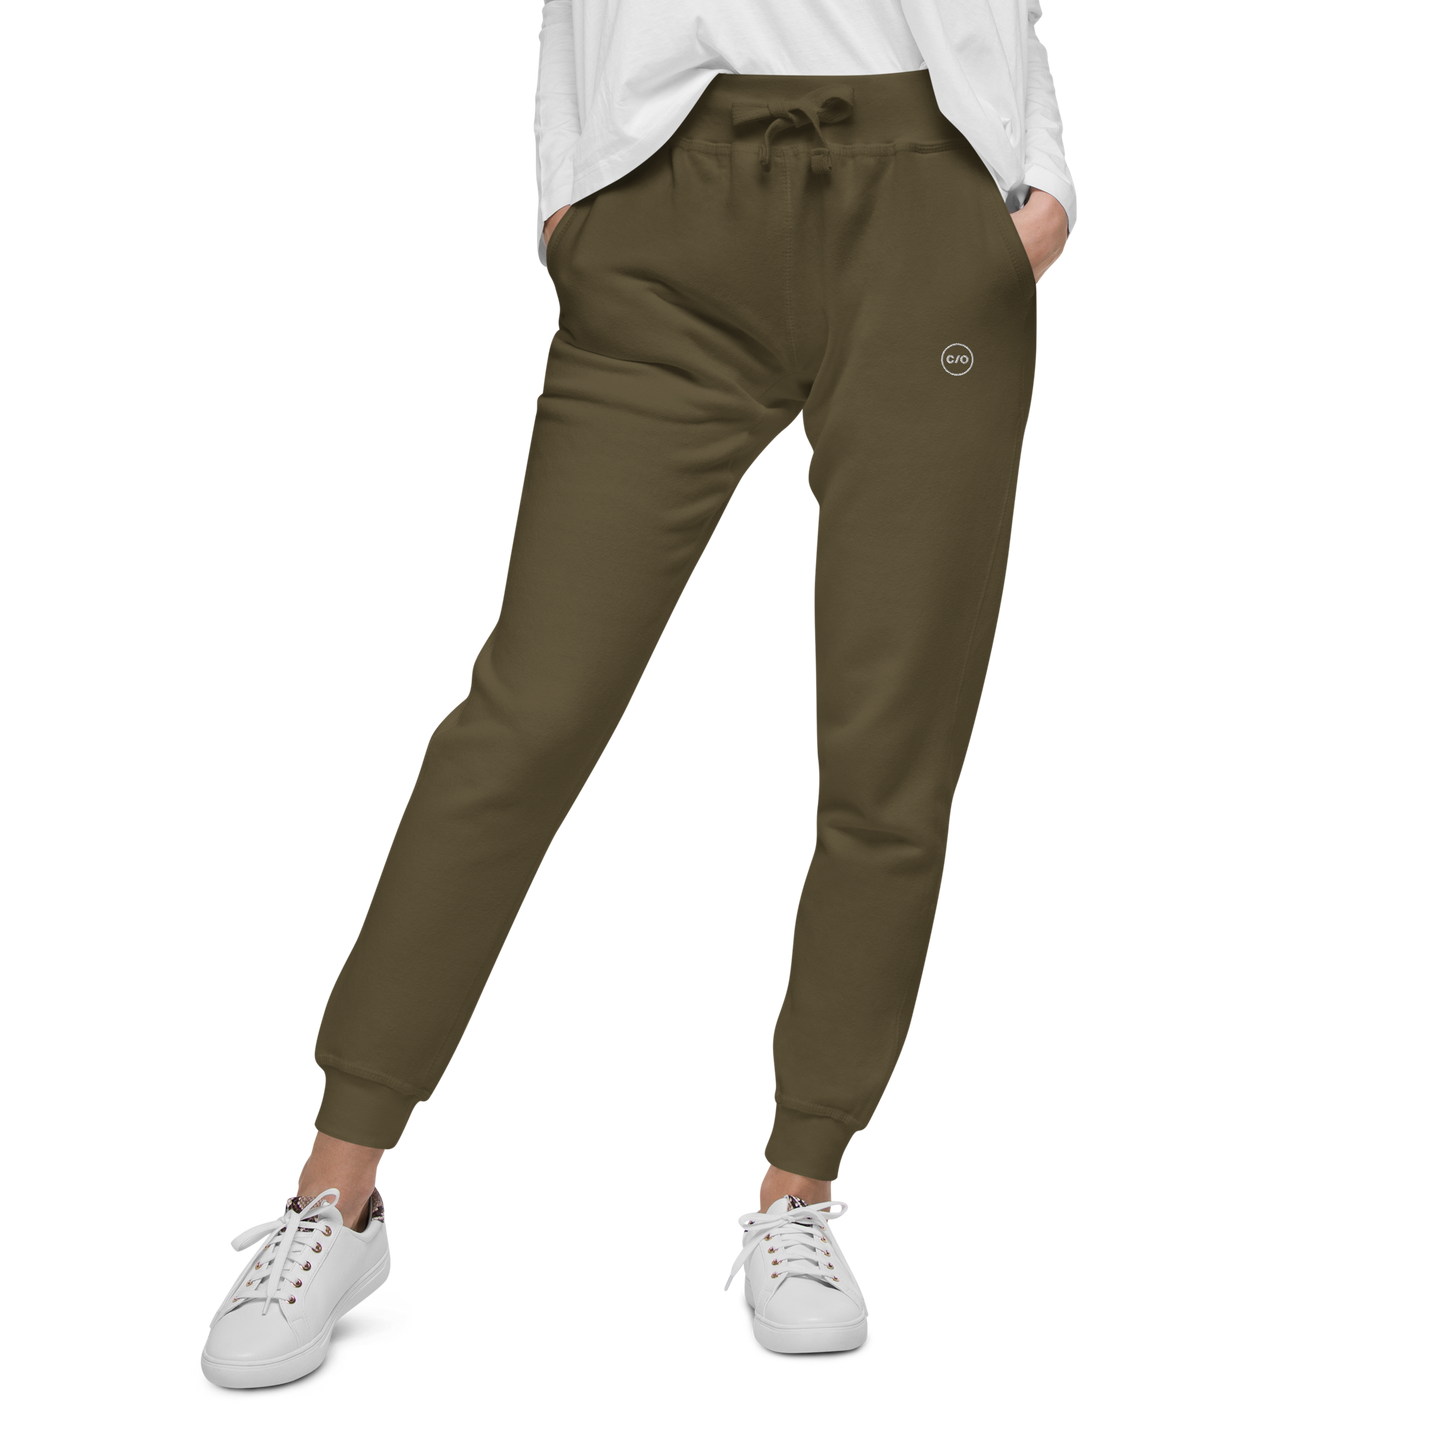 Neue Supply Co. Women's Performance Jogger in Green